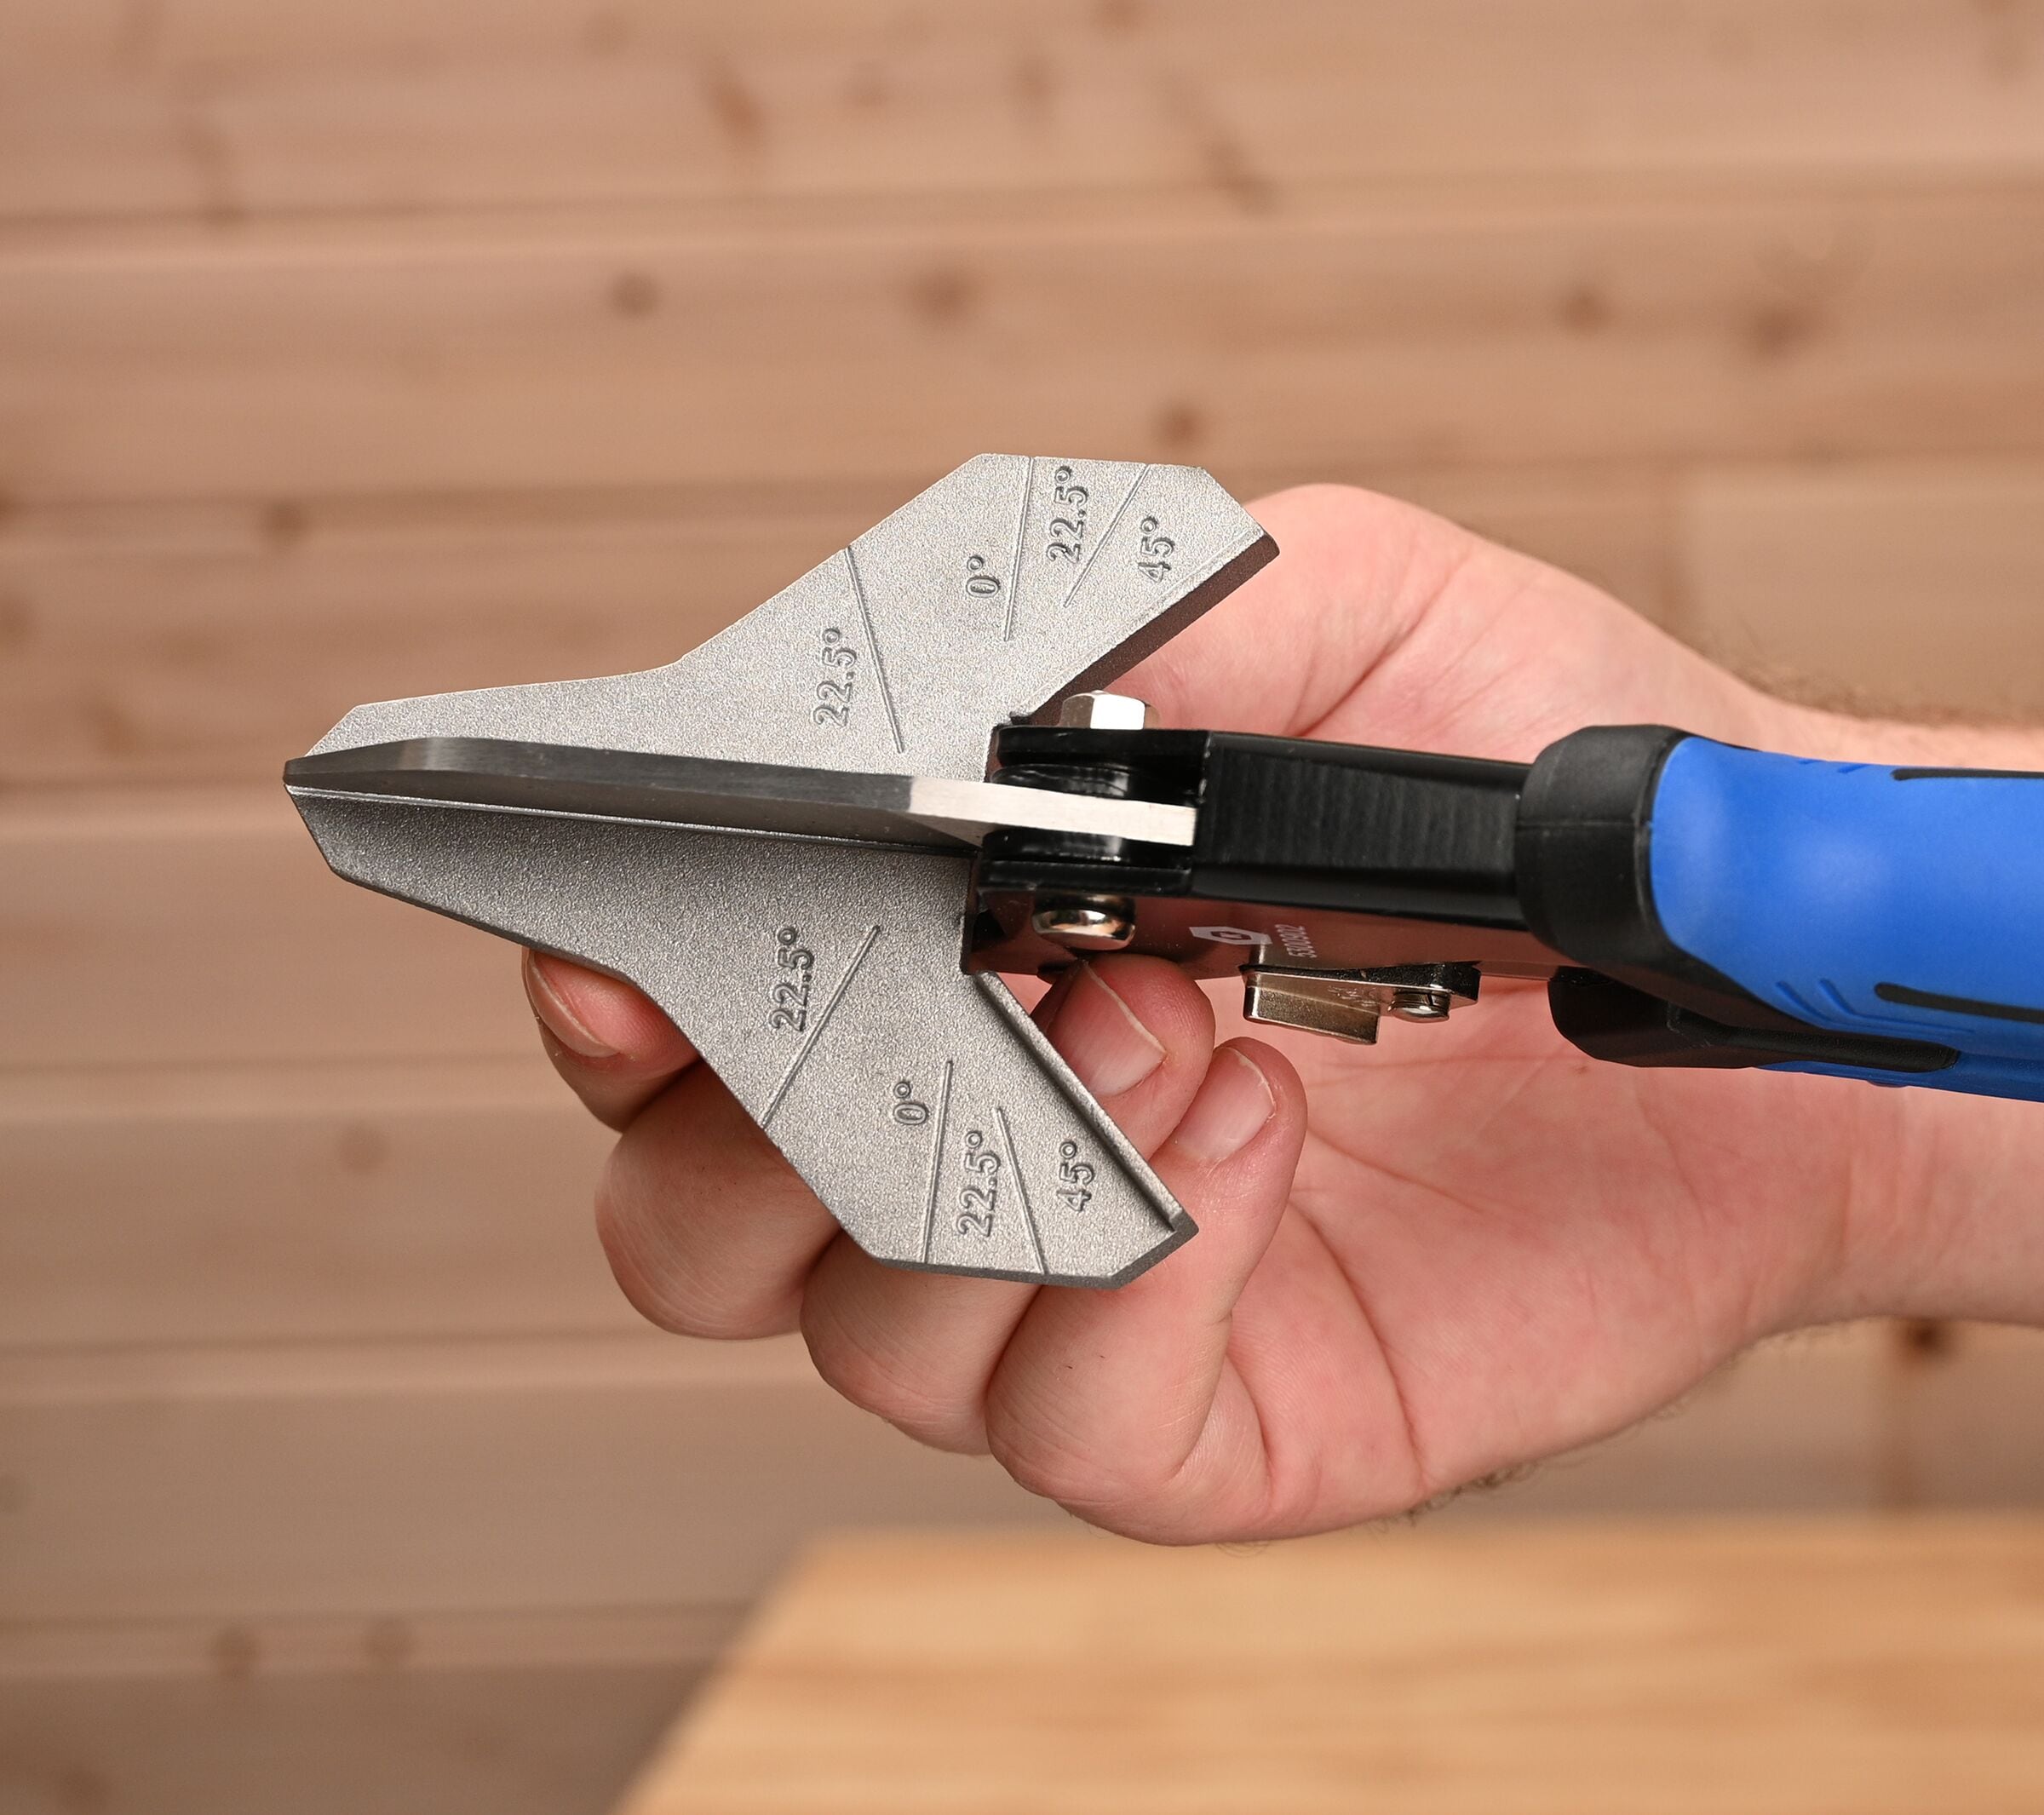 Do These Shears Work? Crescent Miter Shear Review. 